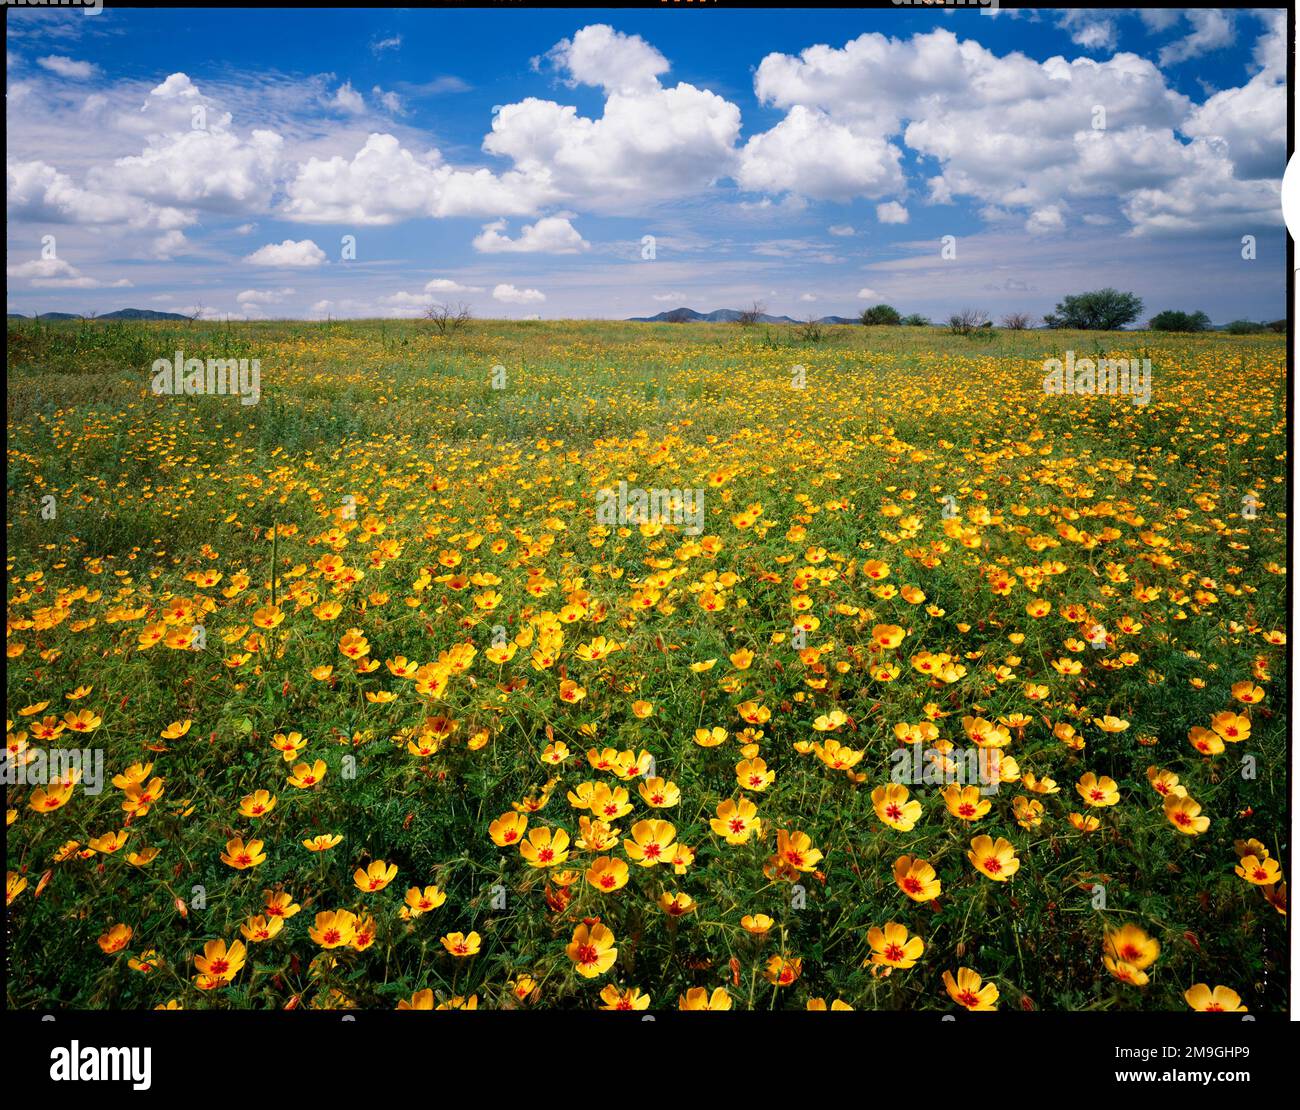 Lots of yellow wildflowers in meadow under blue sky Stock Photo